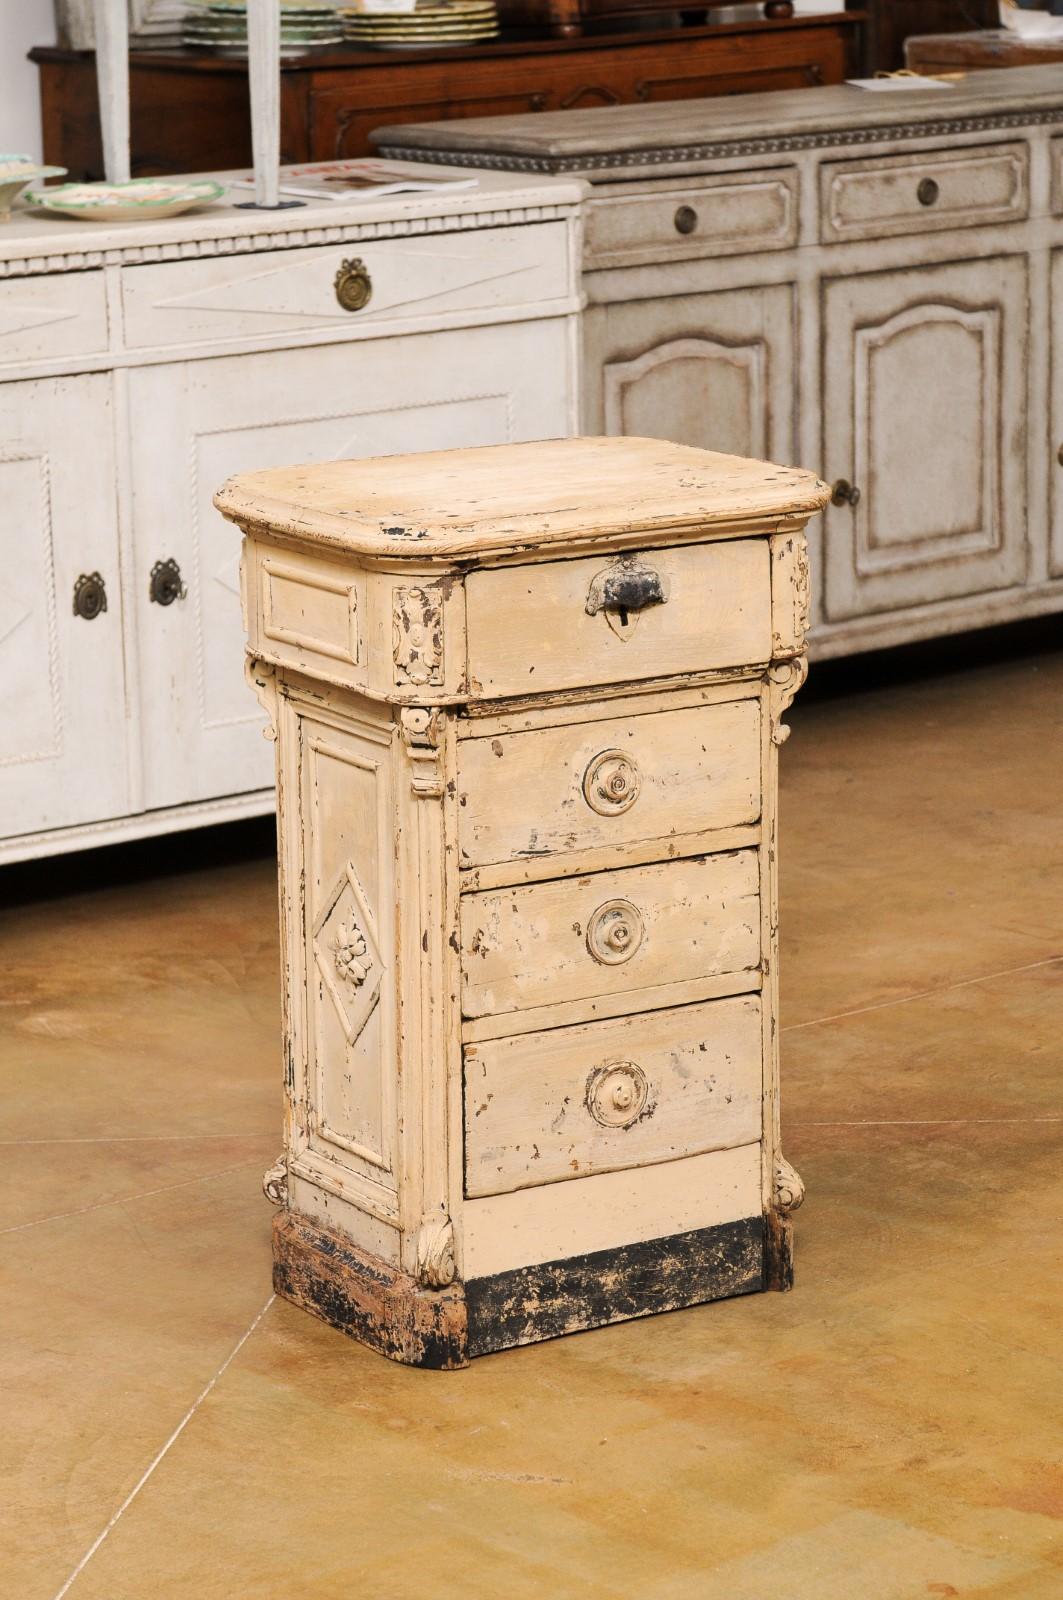 A French painted fir seeds counter from the 19th Century, with four drawers and nicely weathered appearance. Created in France during the 19th century, this fir seeds counter captures our attention with its rustic character and carved motifs.